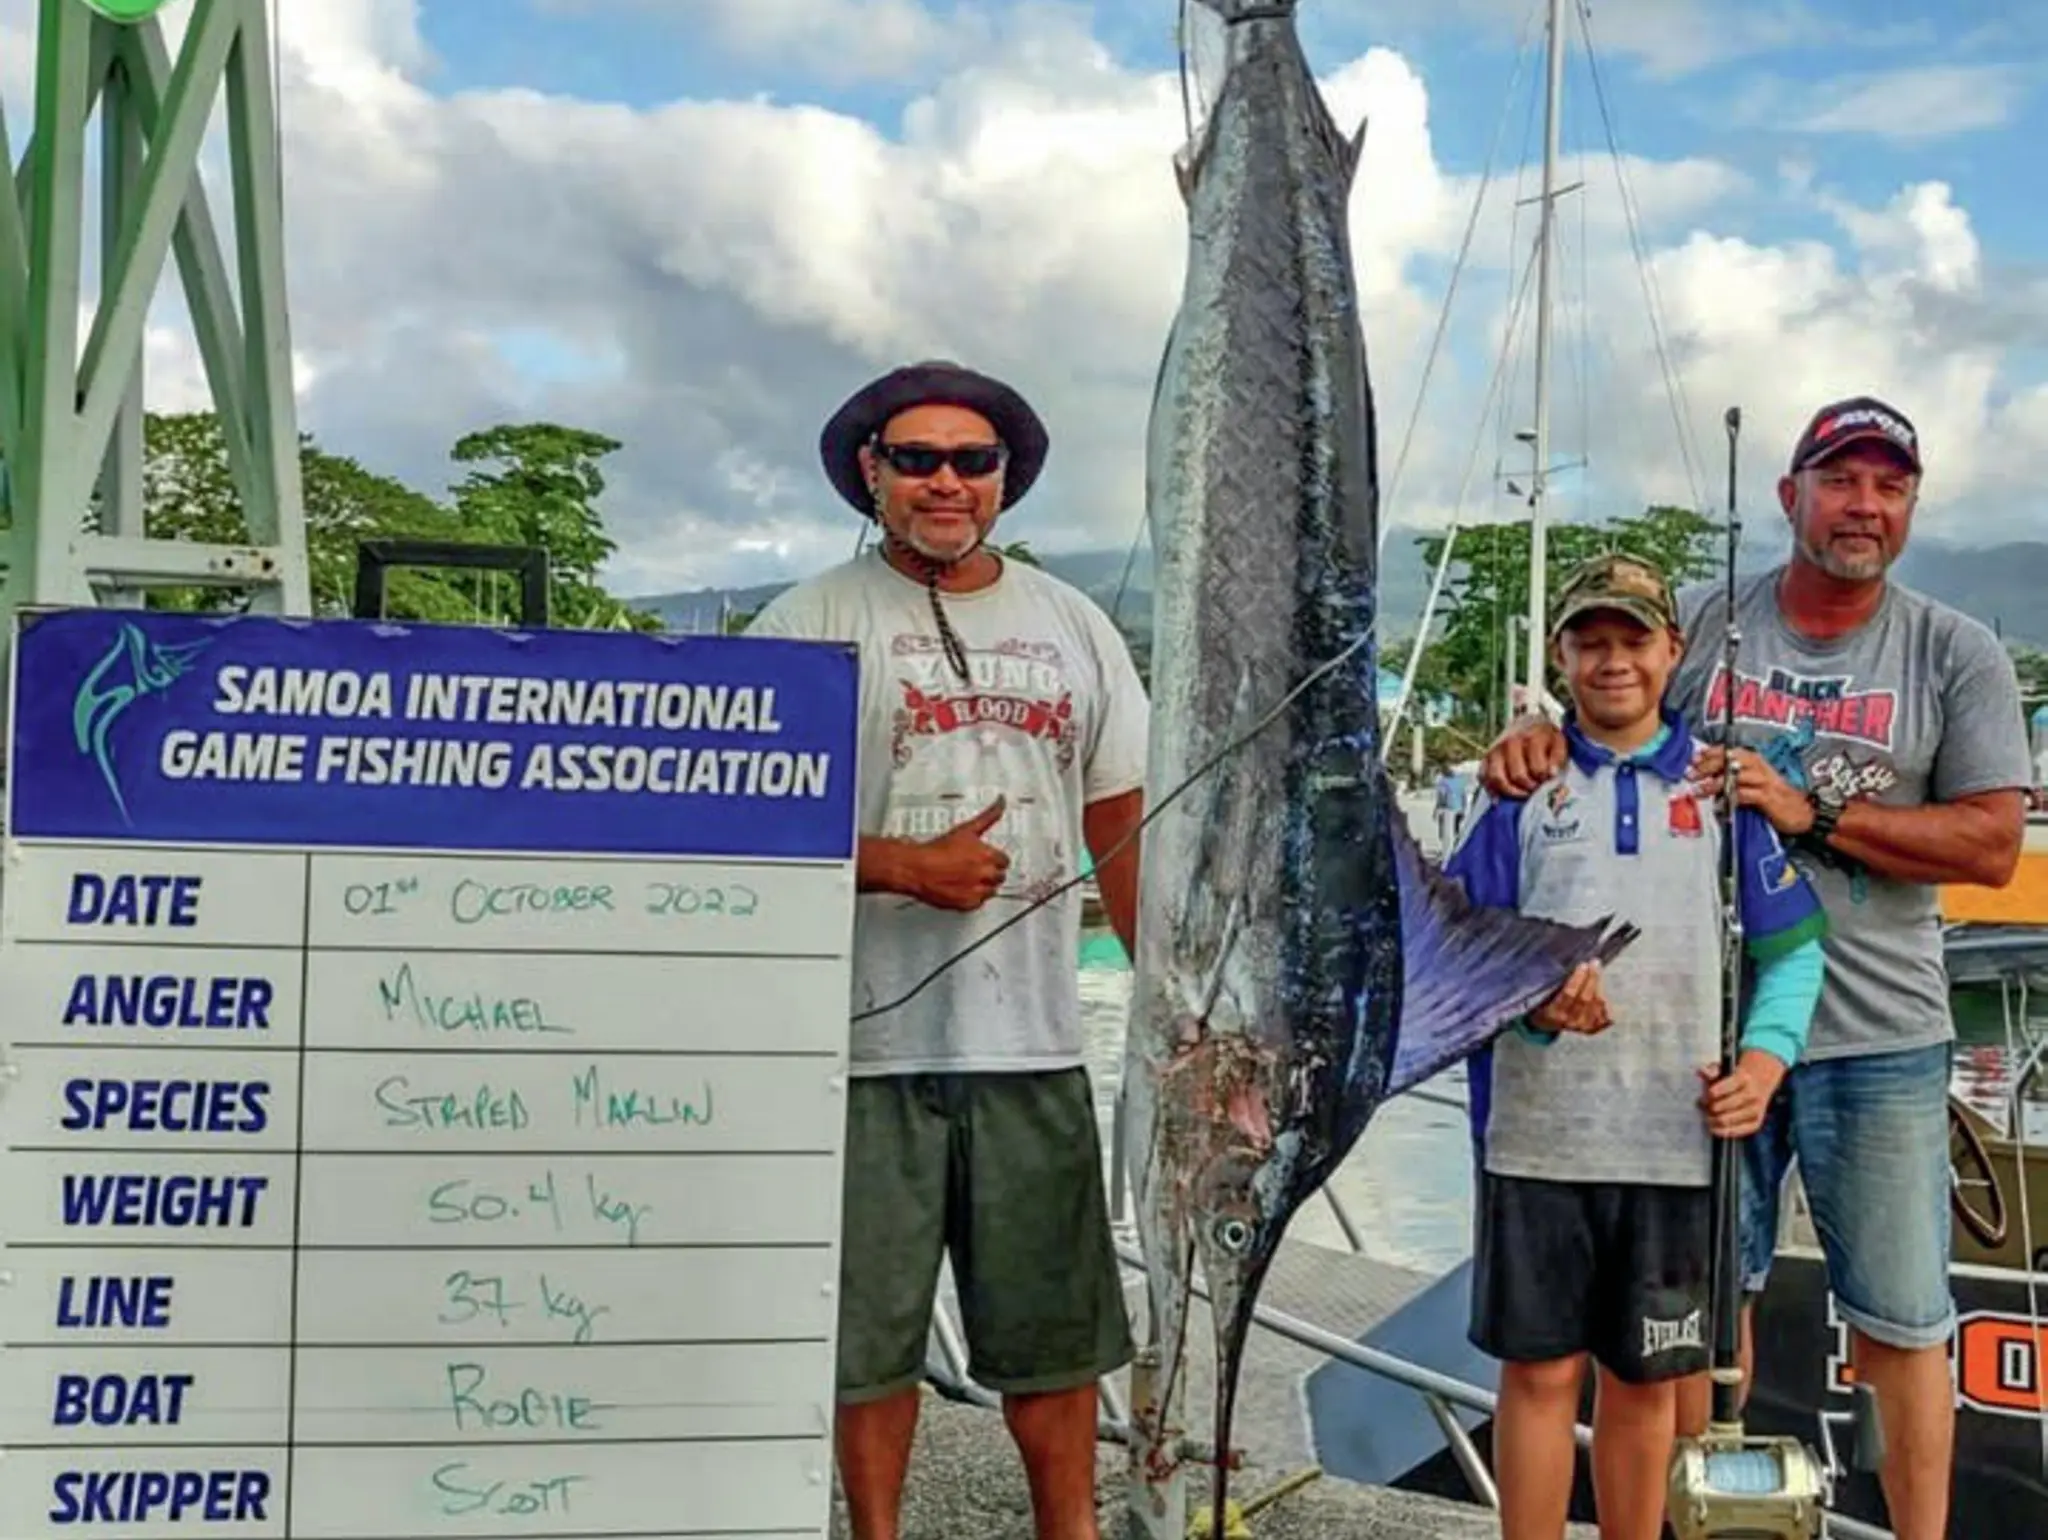 TRADE WINDS DICTATE FISHING OPPORTUNITIES